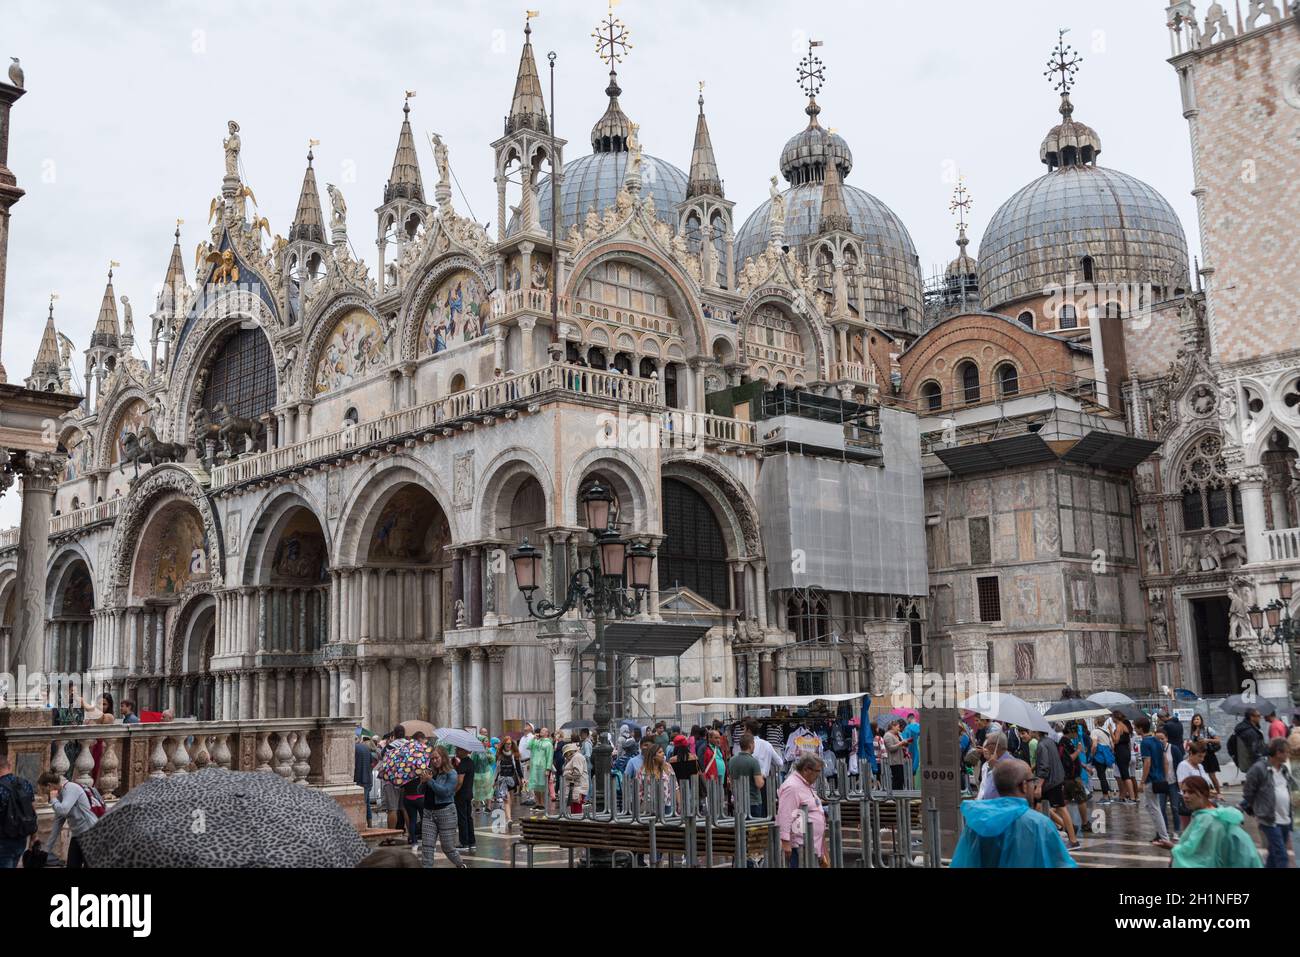 Worth seeing St. Mark's Basilica in Gothic style on St. Mark's Square in Venice - Italy Stock Photo